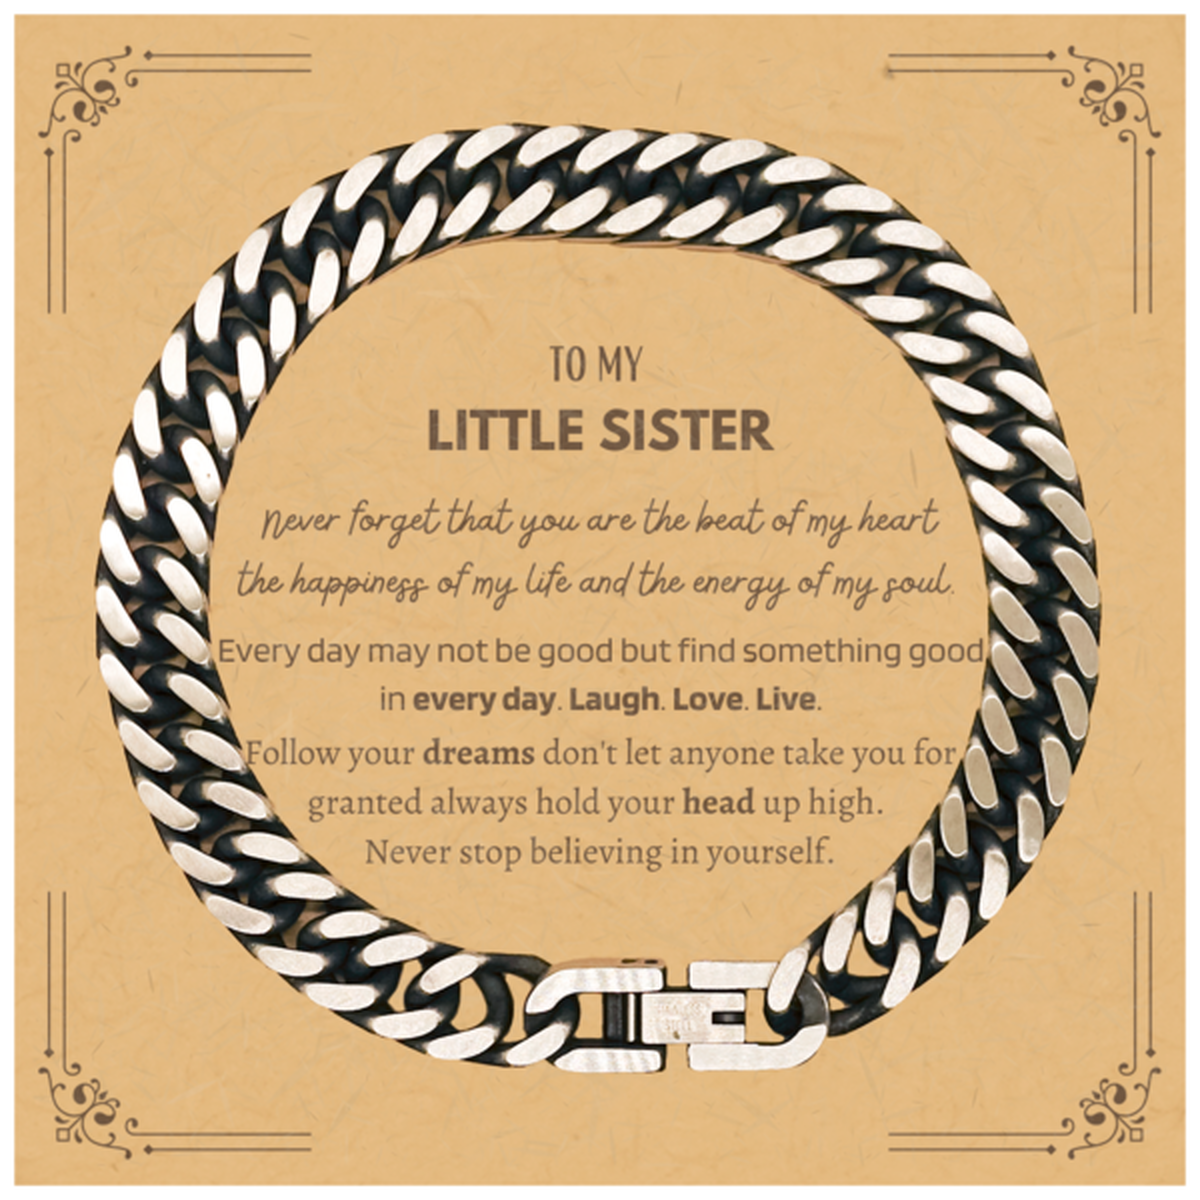 To My Little Sister Message Card Gifts, Christmas Little Sister Cuban Link Chain Bracelet Present, Birthday Unique Motivational For Little Sister, To My Little Sister Never forget that you are the beat of my heart the happiness of my life and the energy o